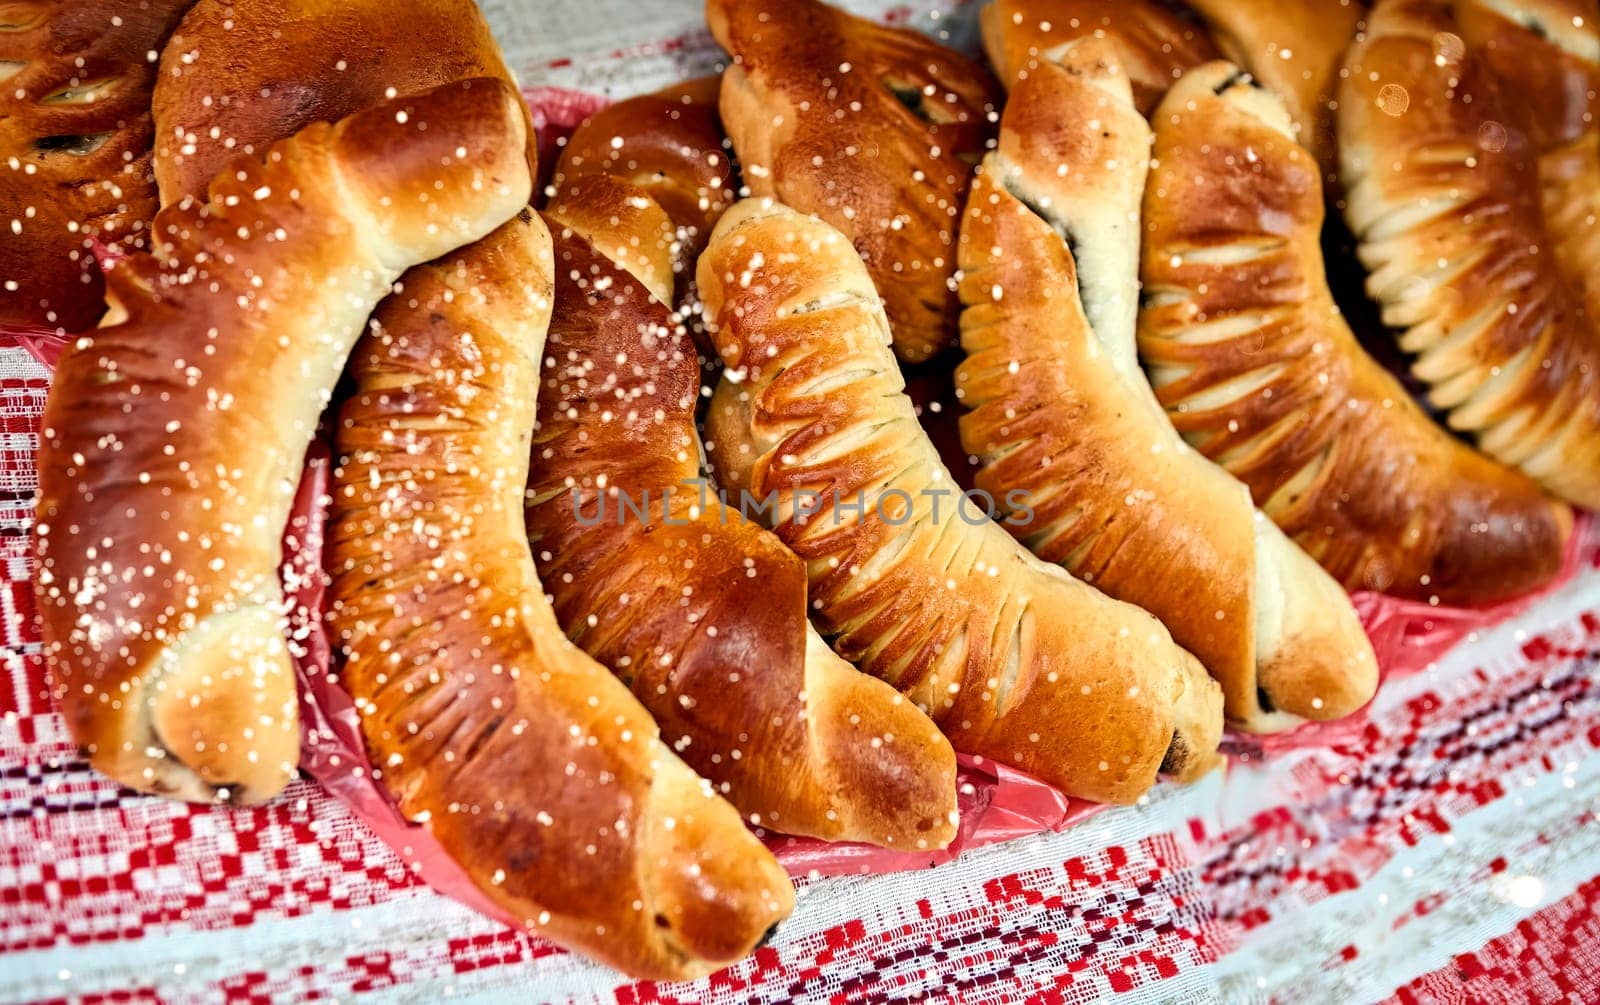 A close-up of freshly baked homemade puff pastry horns filled with rich chocolate cream on a red checkered tablecloth. Golden brown and flaky pastry, perfect for a sweet breakfast or snack.